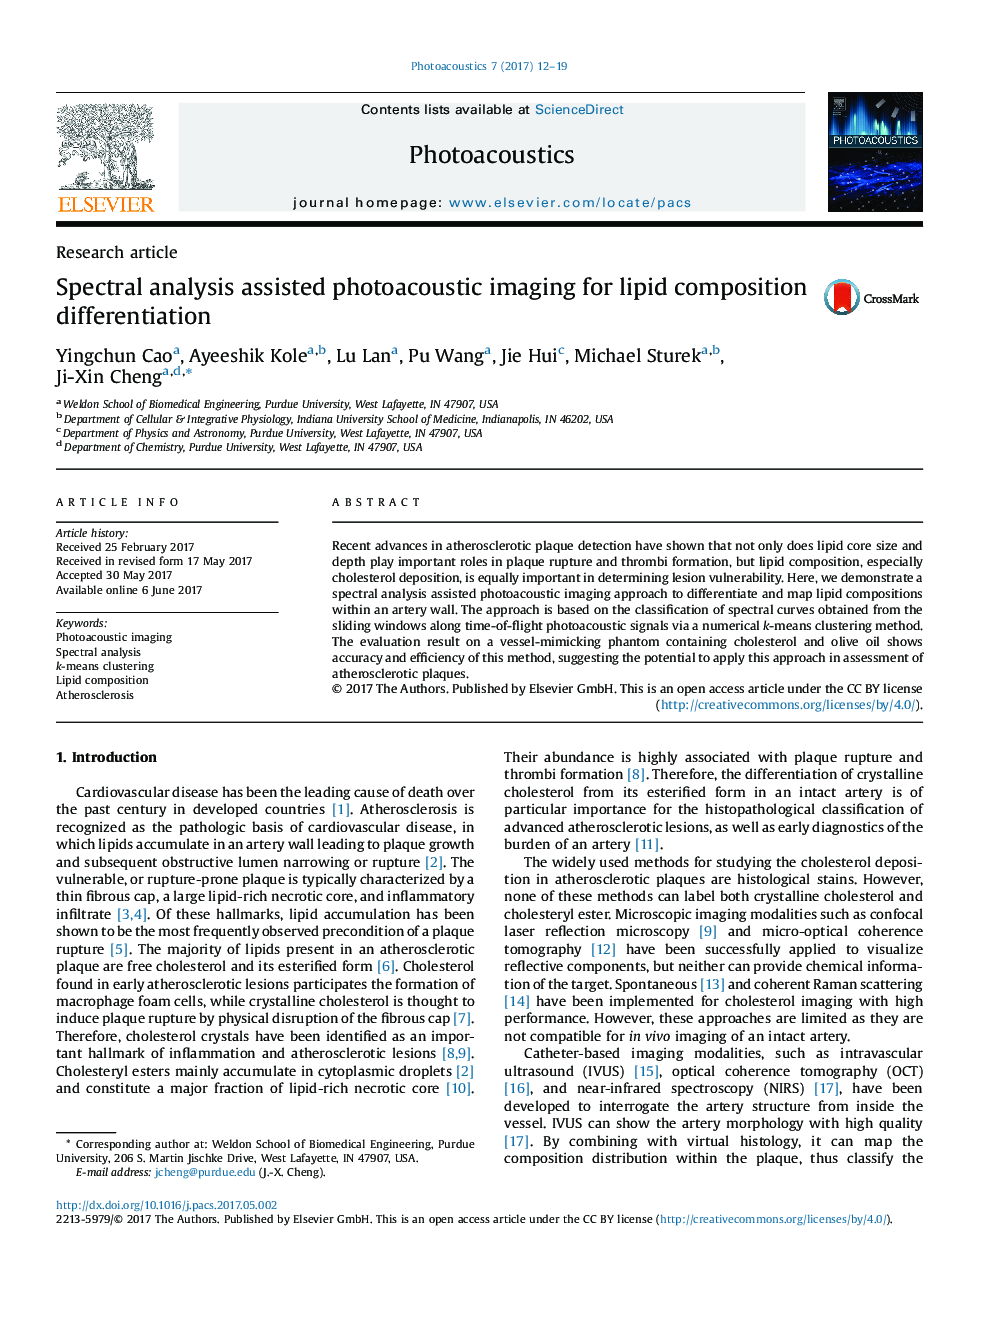 Spectral analysis assisted photoacoustic imaging for lipid composition differentiation